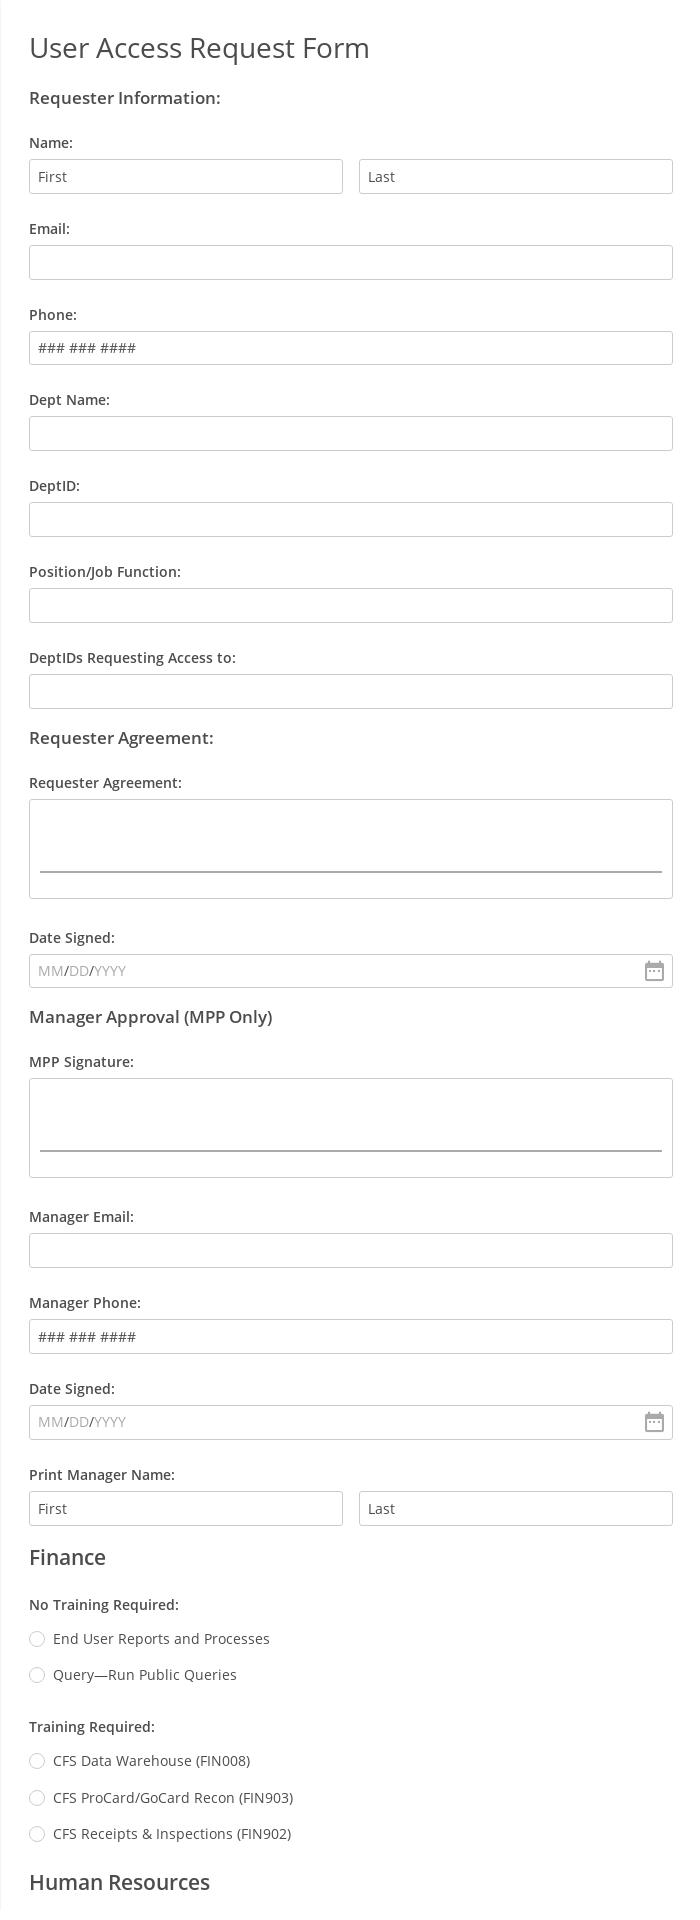 User Access Request Form